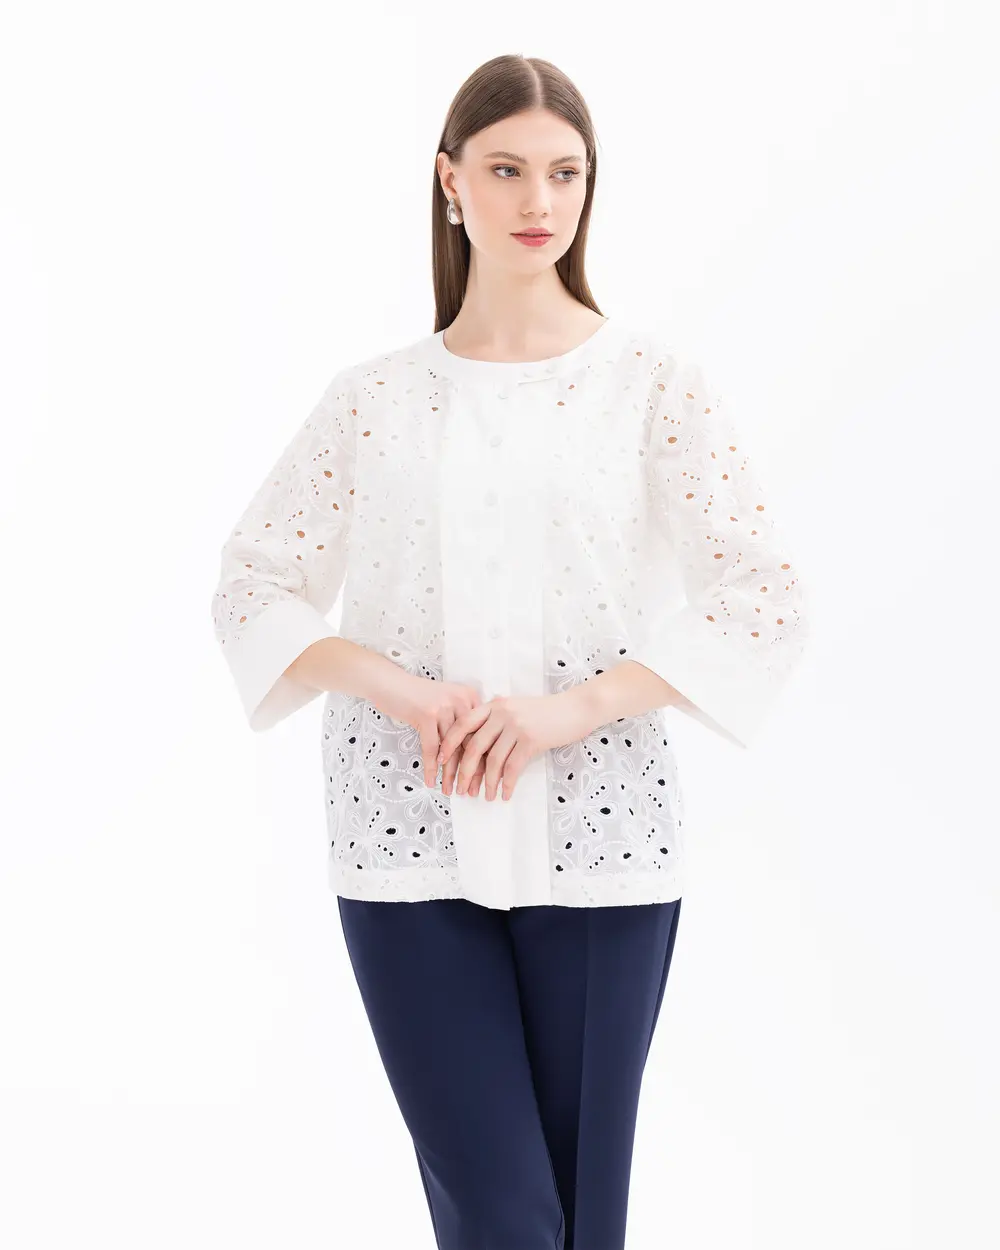 Floral Patterned Button Detailed Shirt